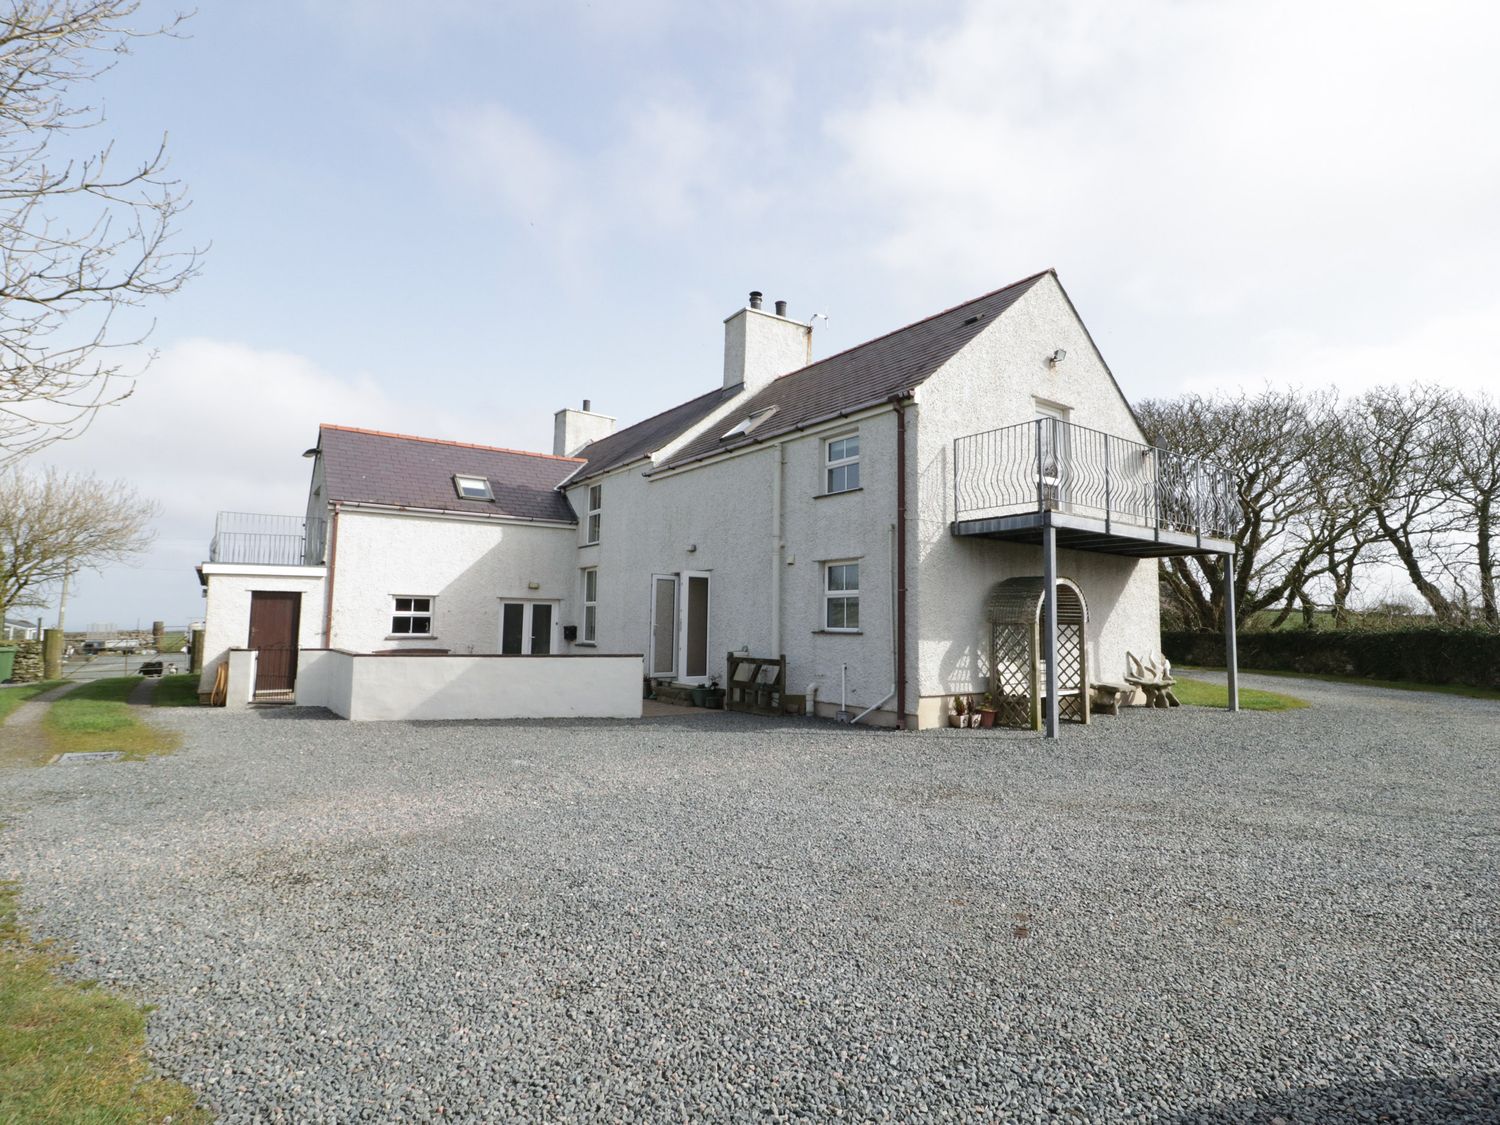 Bodegri Cottage - Anglesey - 961817 - photo 1